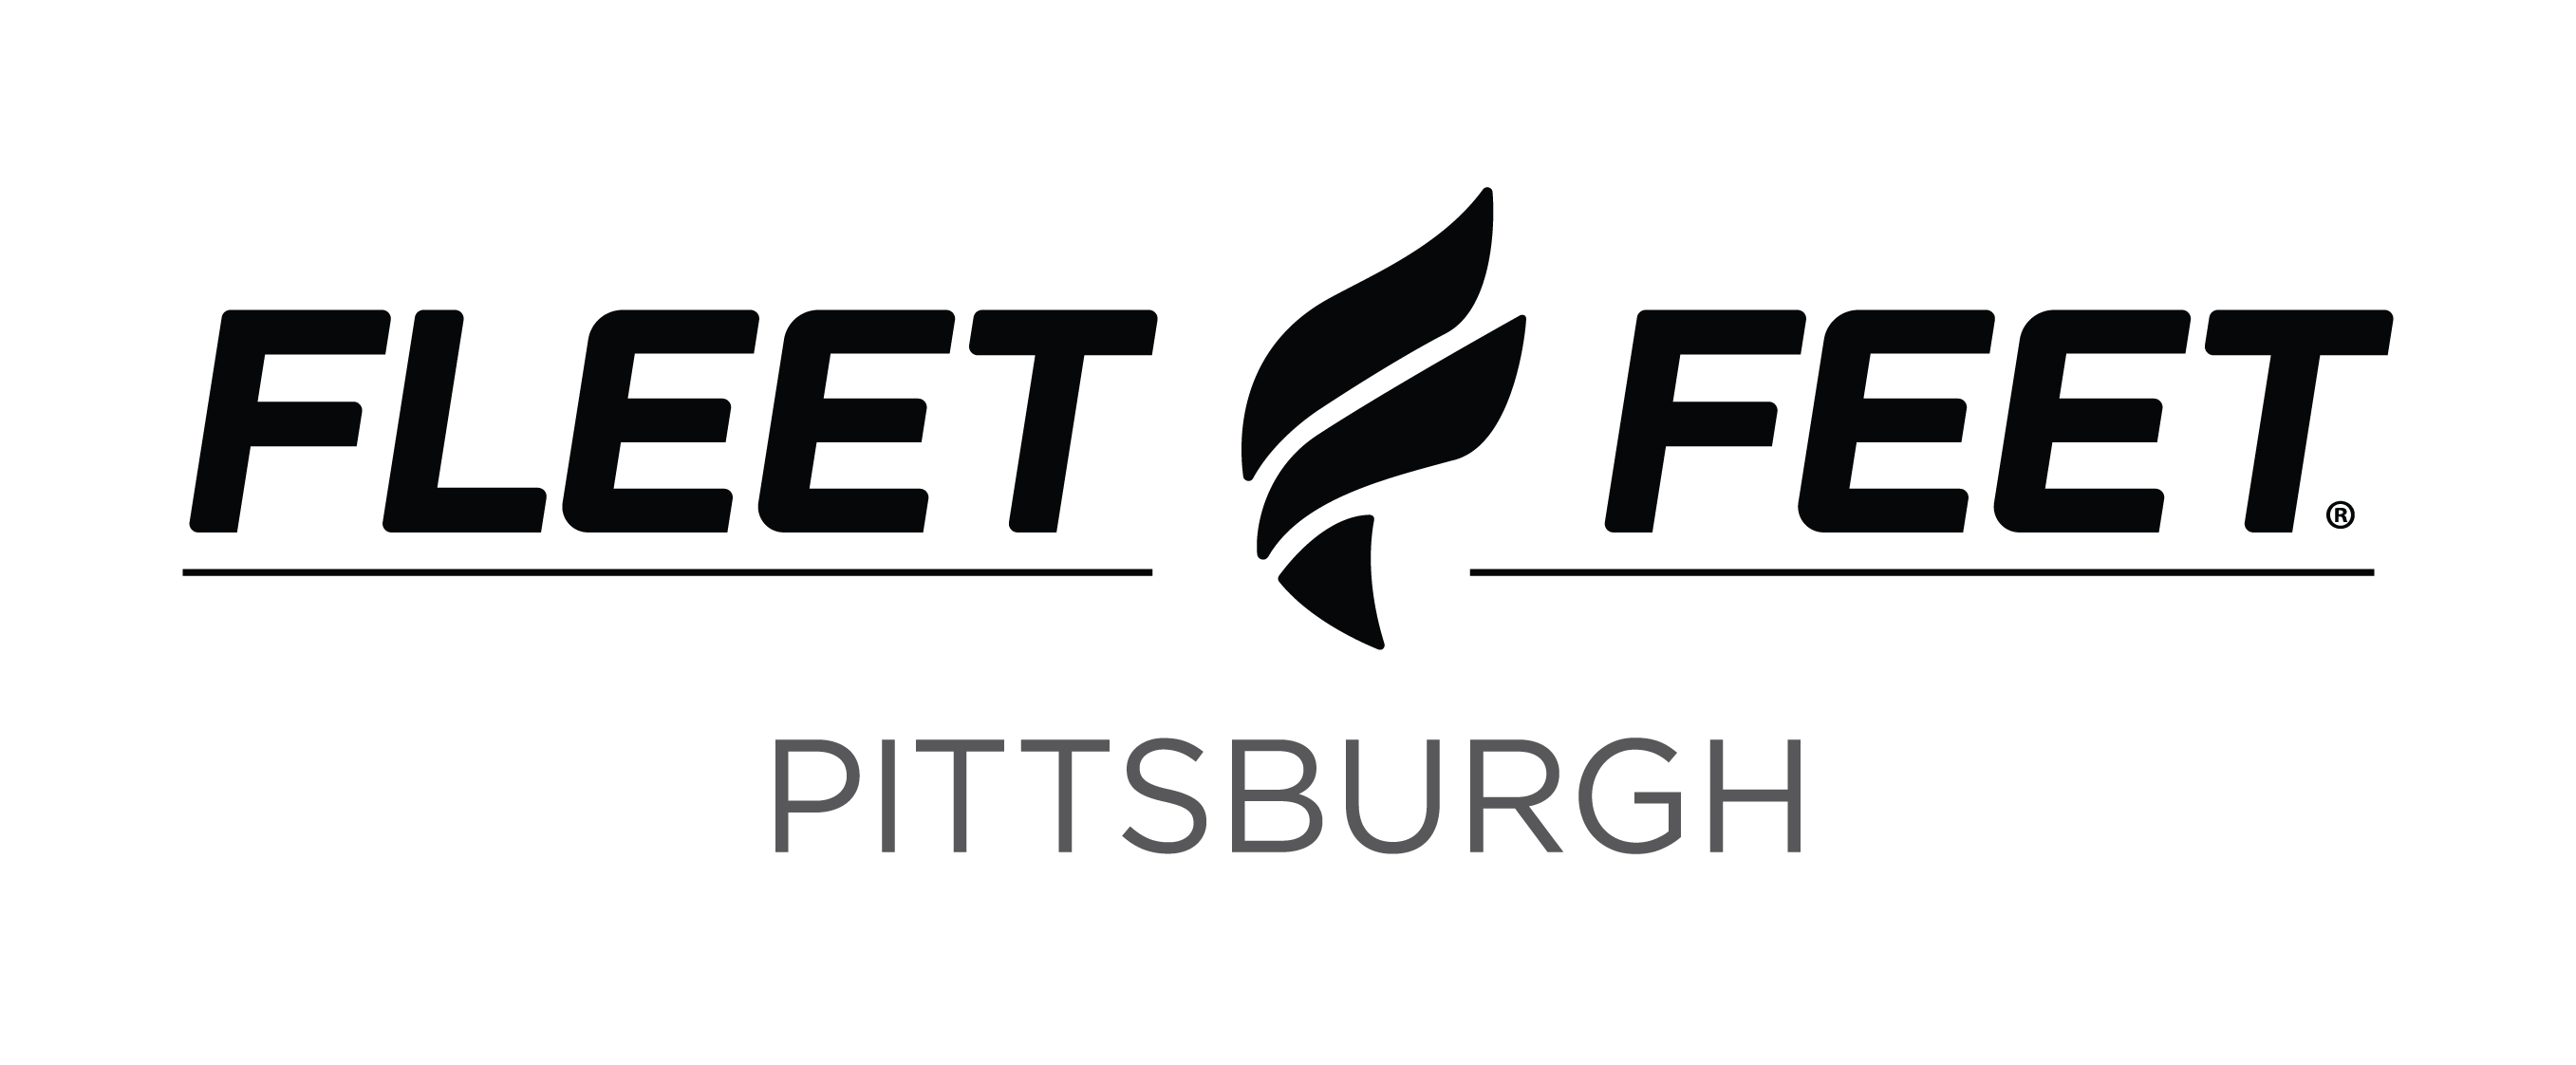 Our Core Values - Fleet Feet Pittsburgh